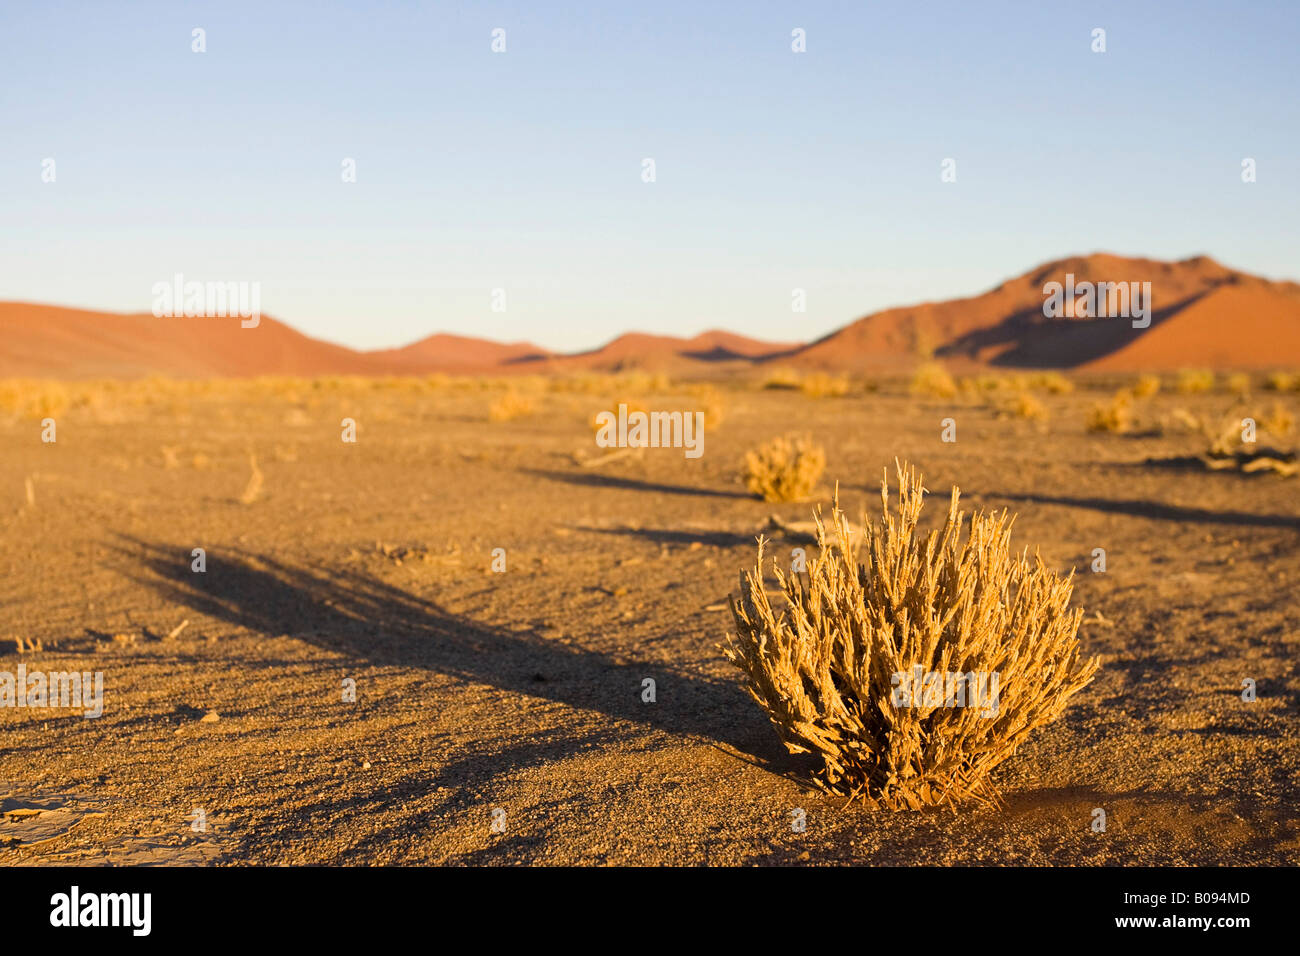 Clumps of grass in the dry riverbed of the Tsauchab River, Namib Desert, Namibia, Africa Stock Photo